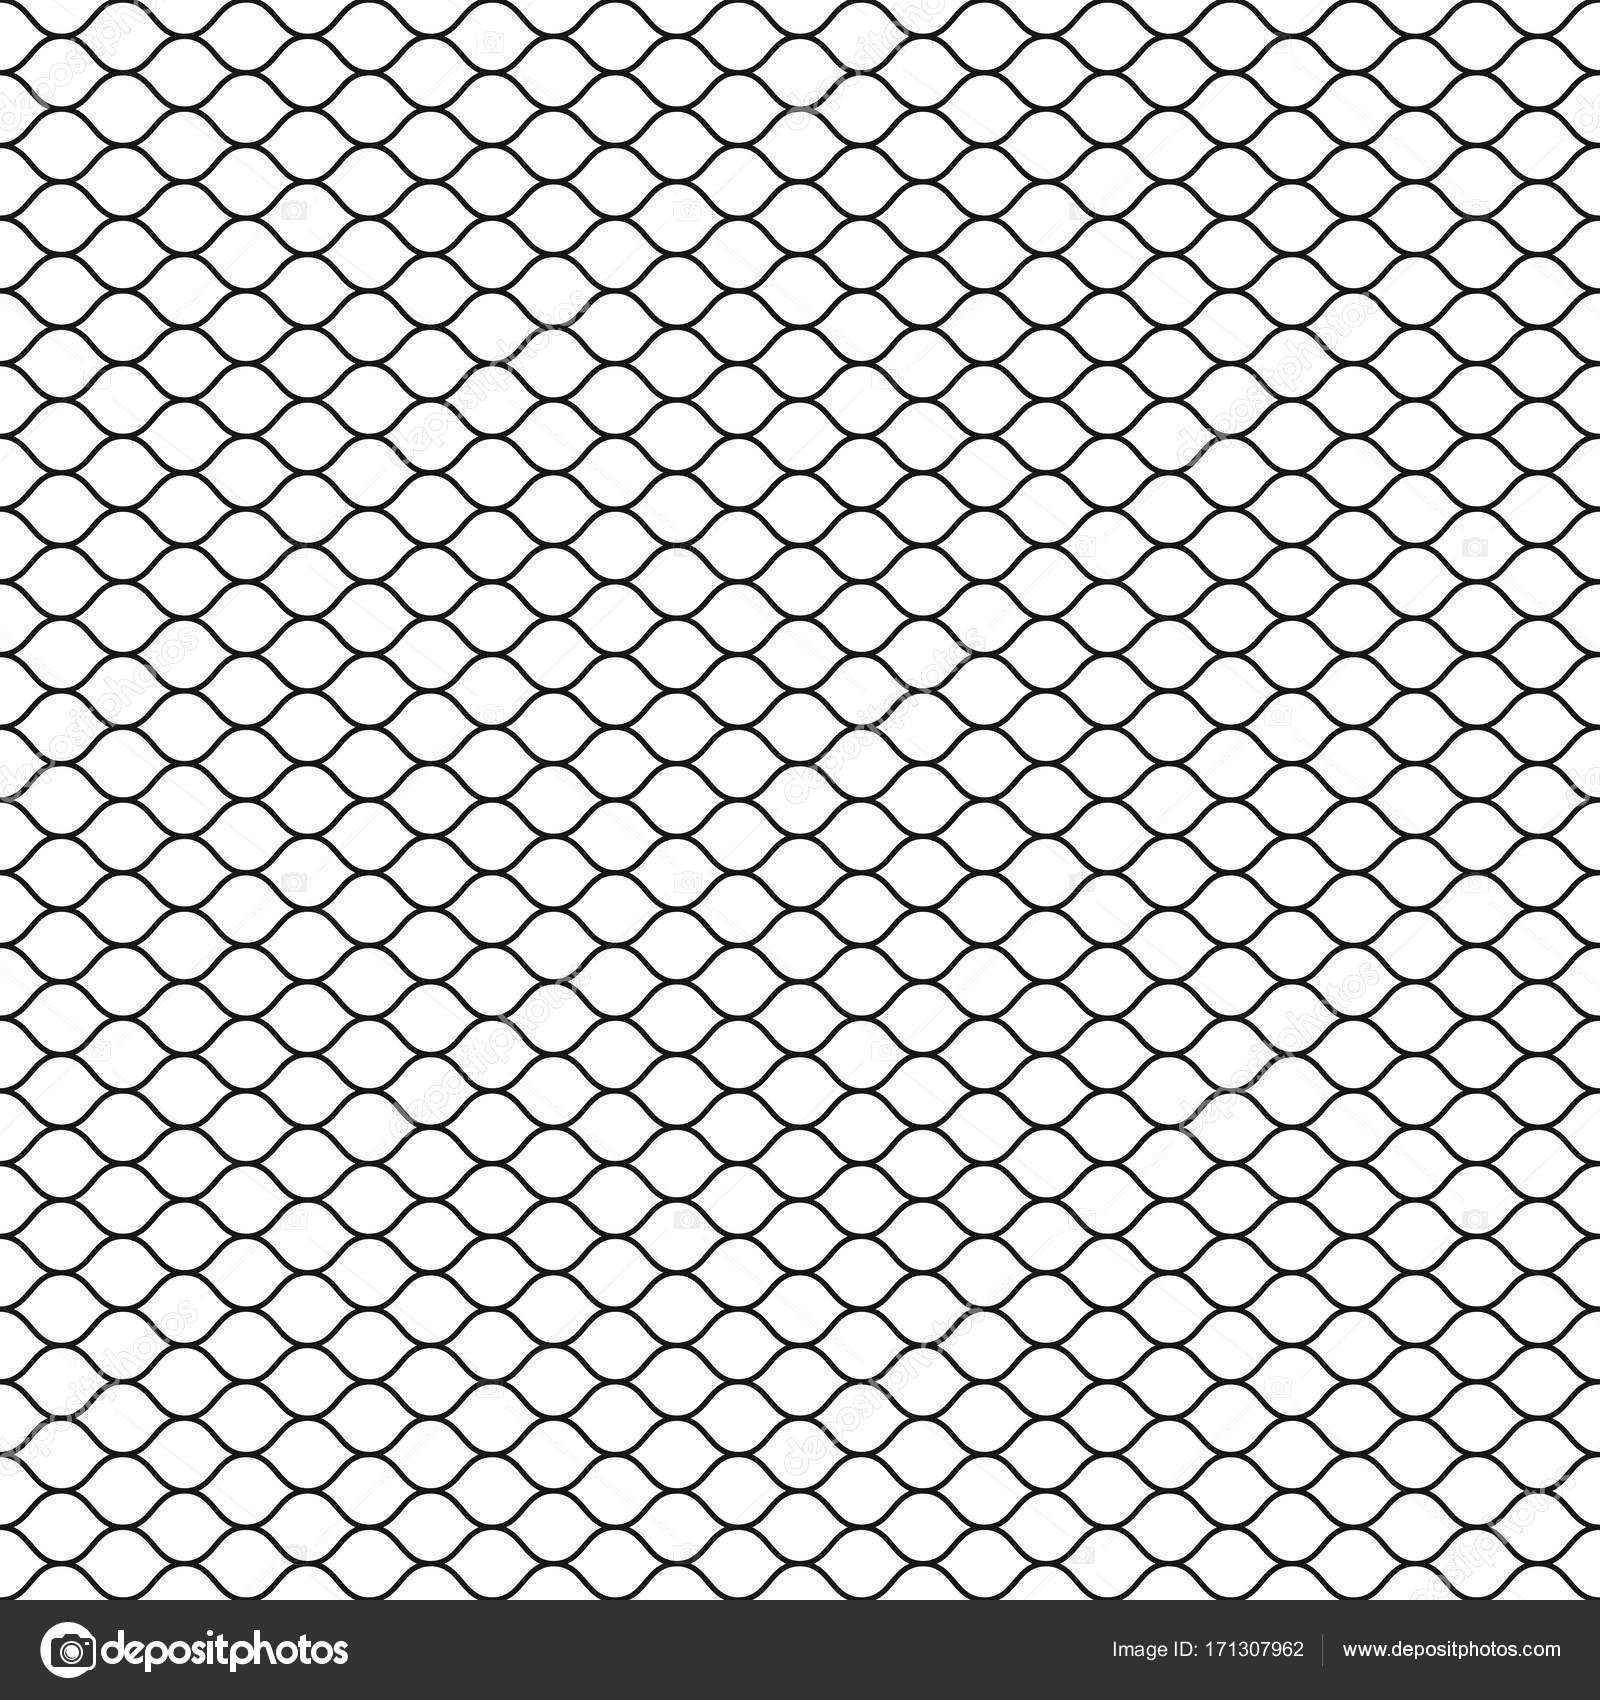 Wired fence. Chain link fence. Fish net. Net seamless pattern. Rope ...